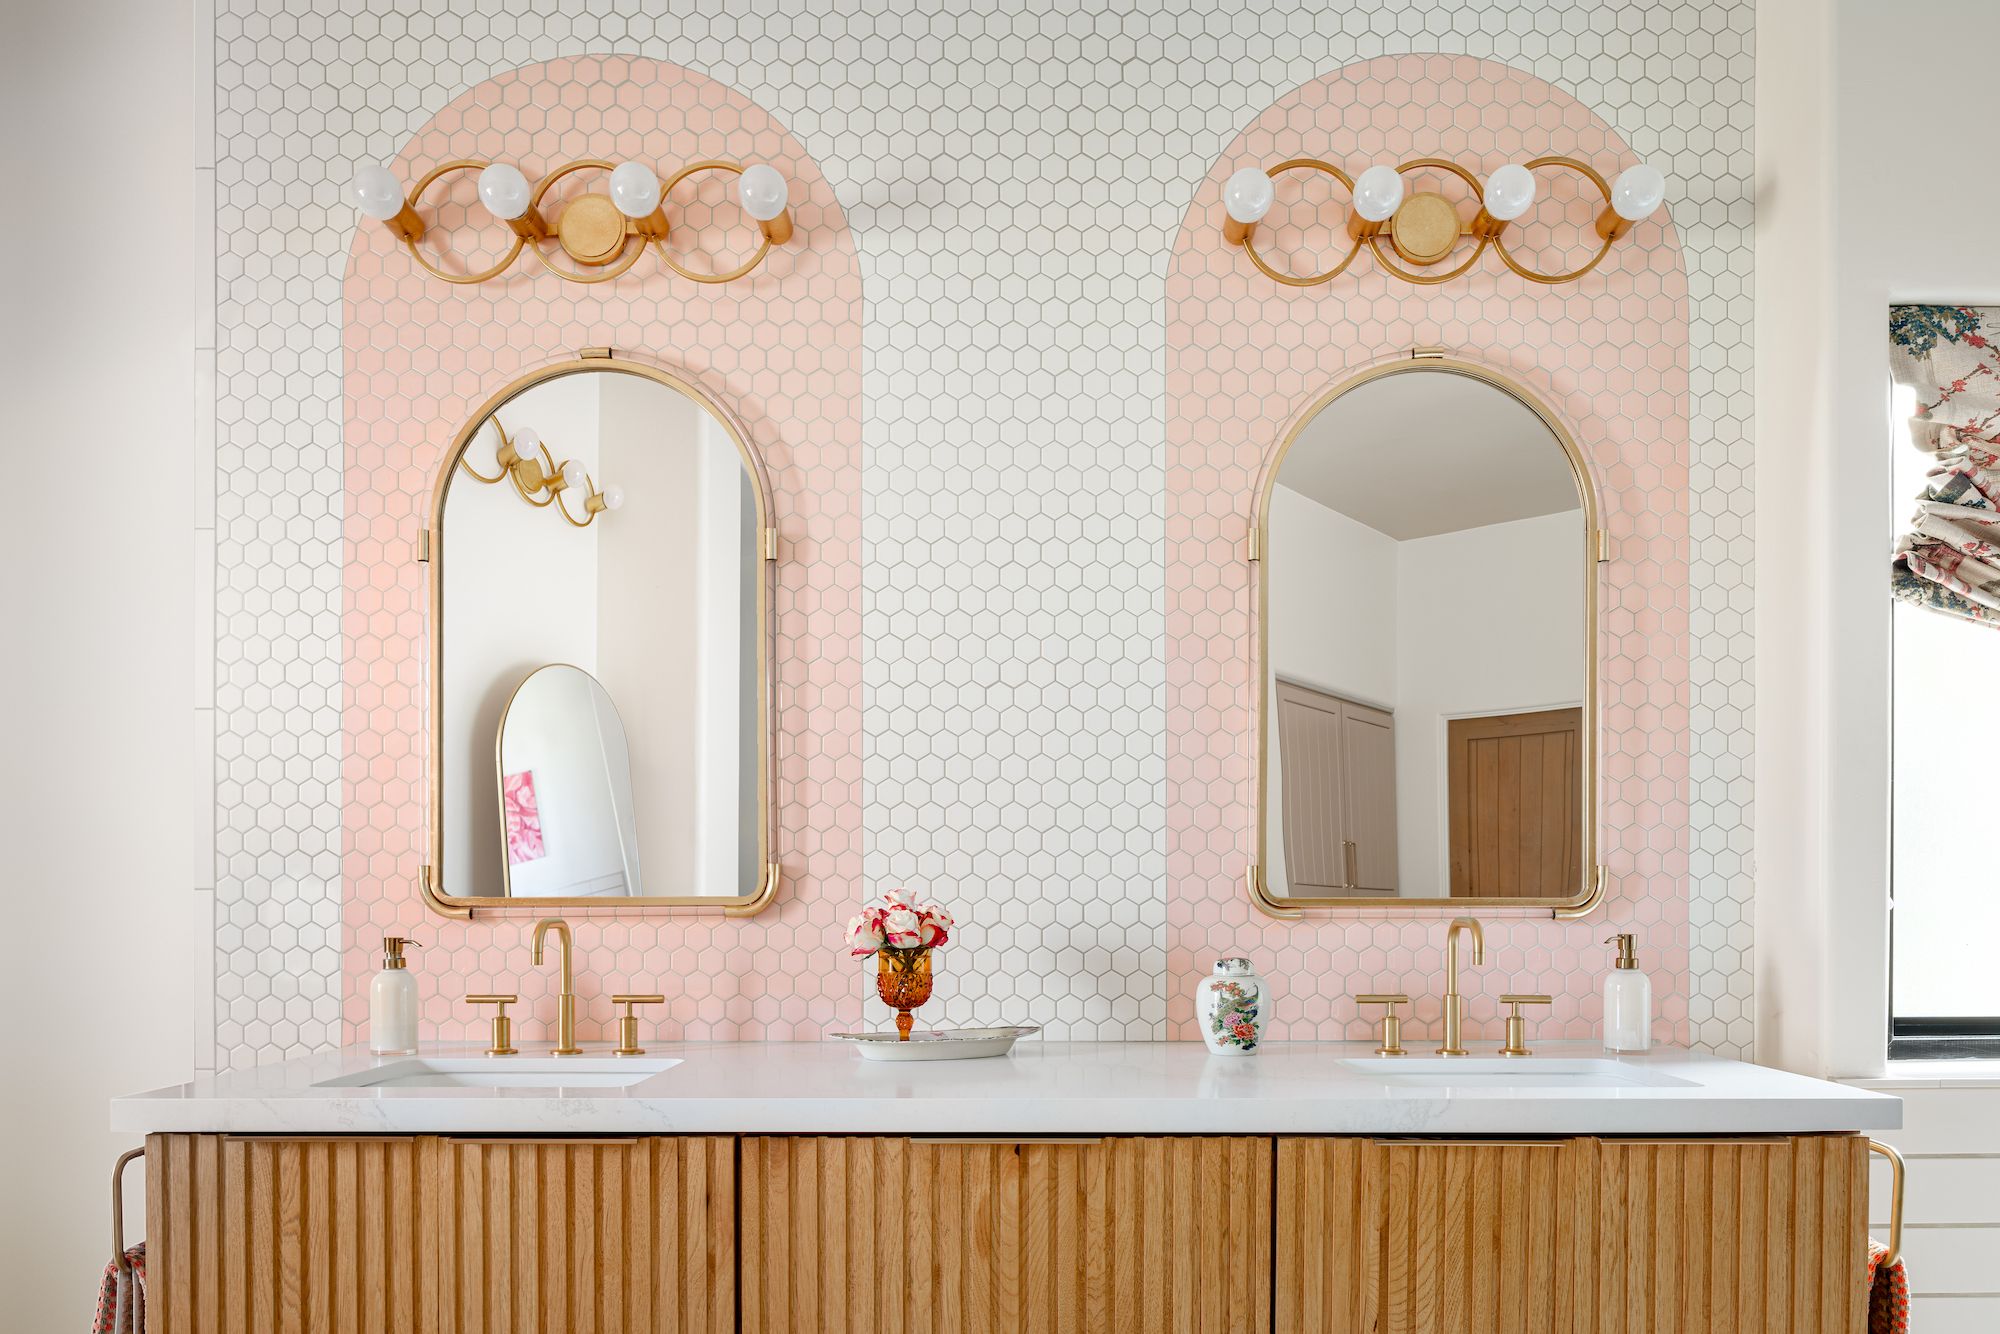 6 Rooms With Pink Walls to Inspire Your Next Refresh